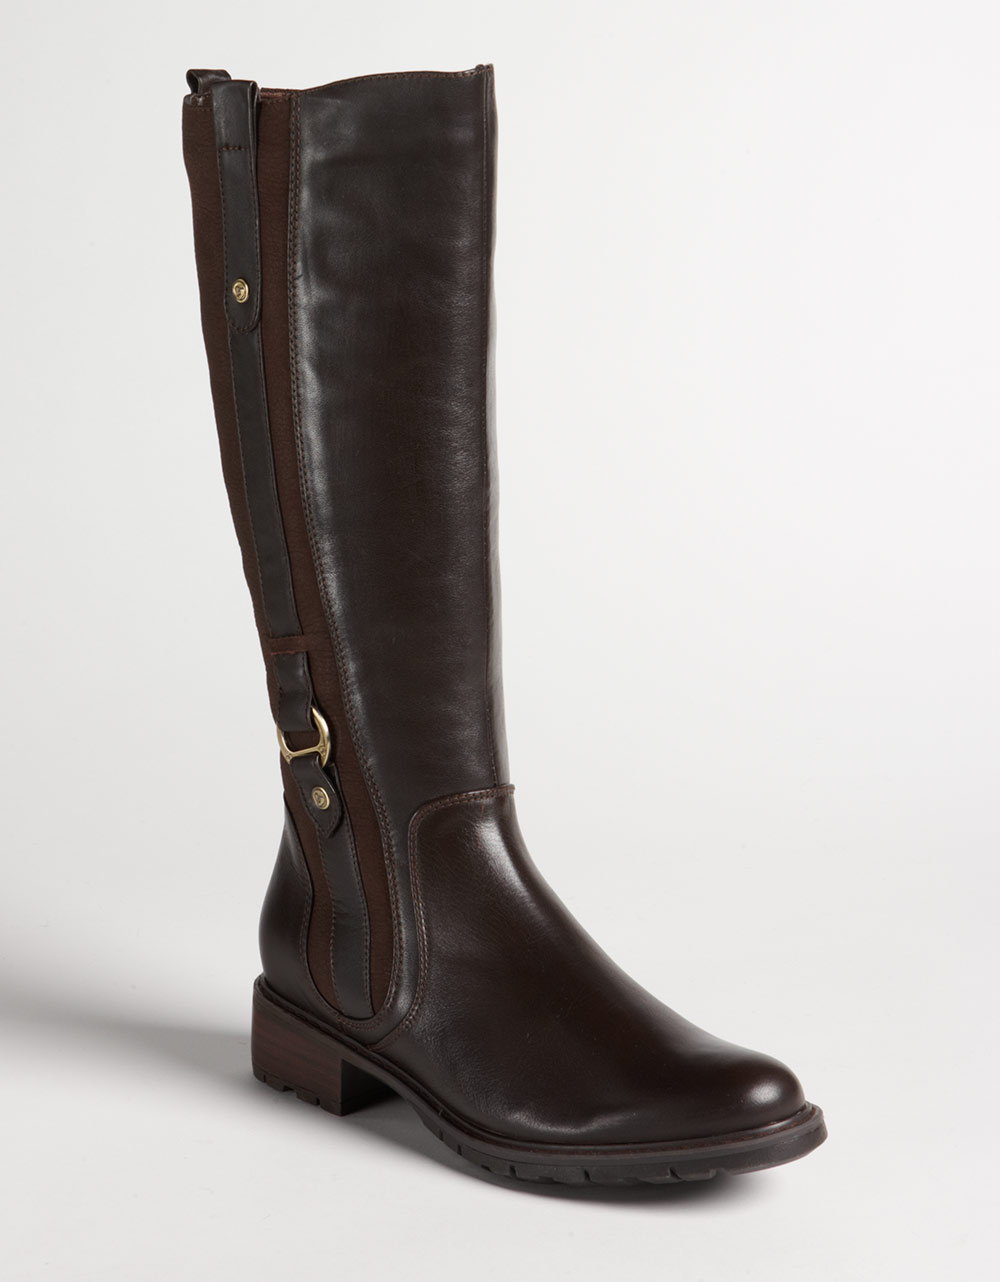 Blondo Varda Leather Tall Boots in Black (brown leather) | Lyst